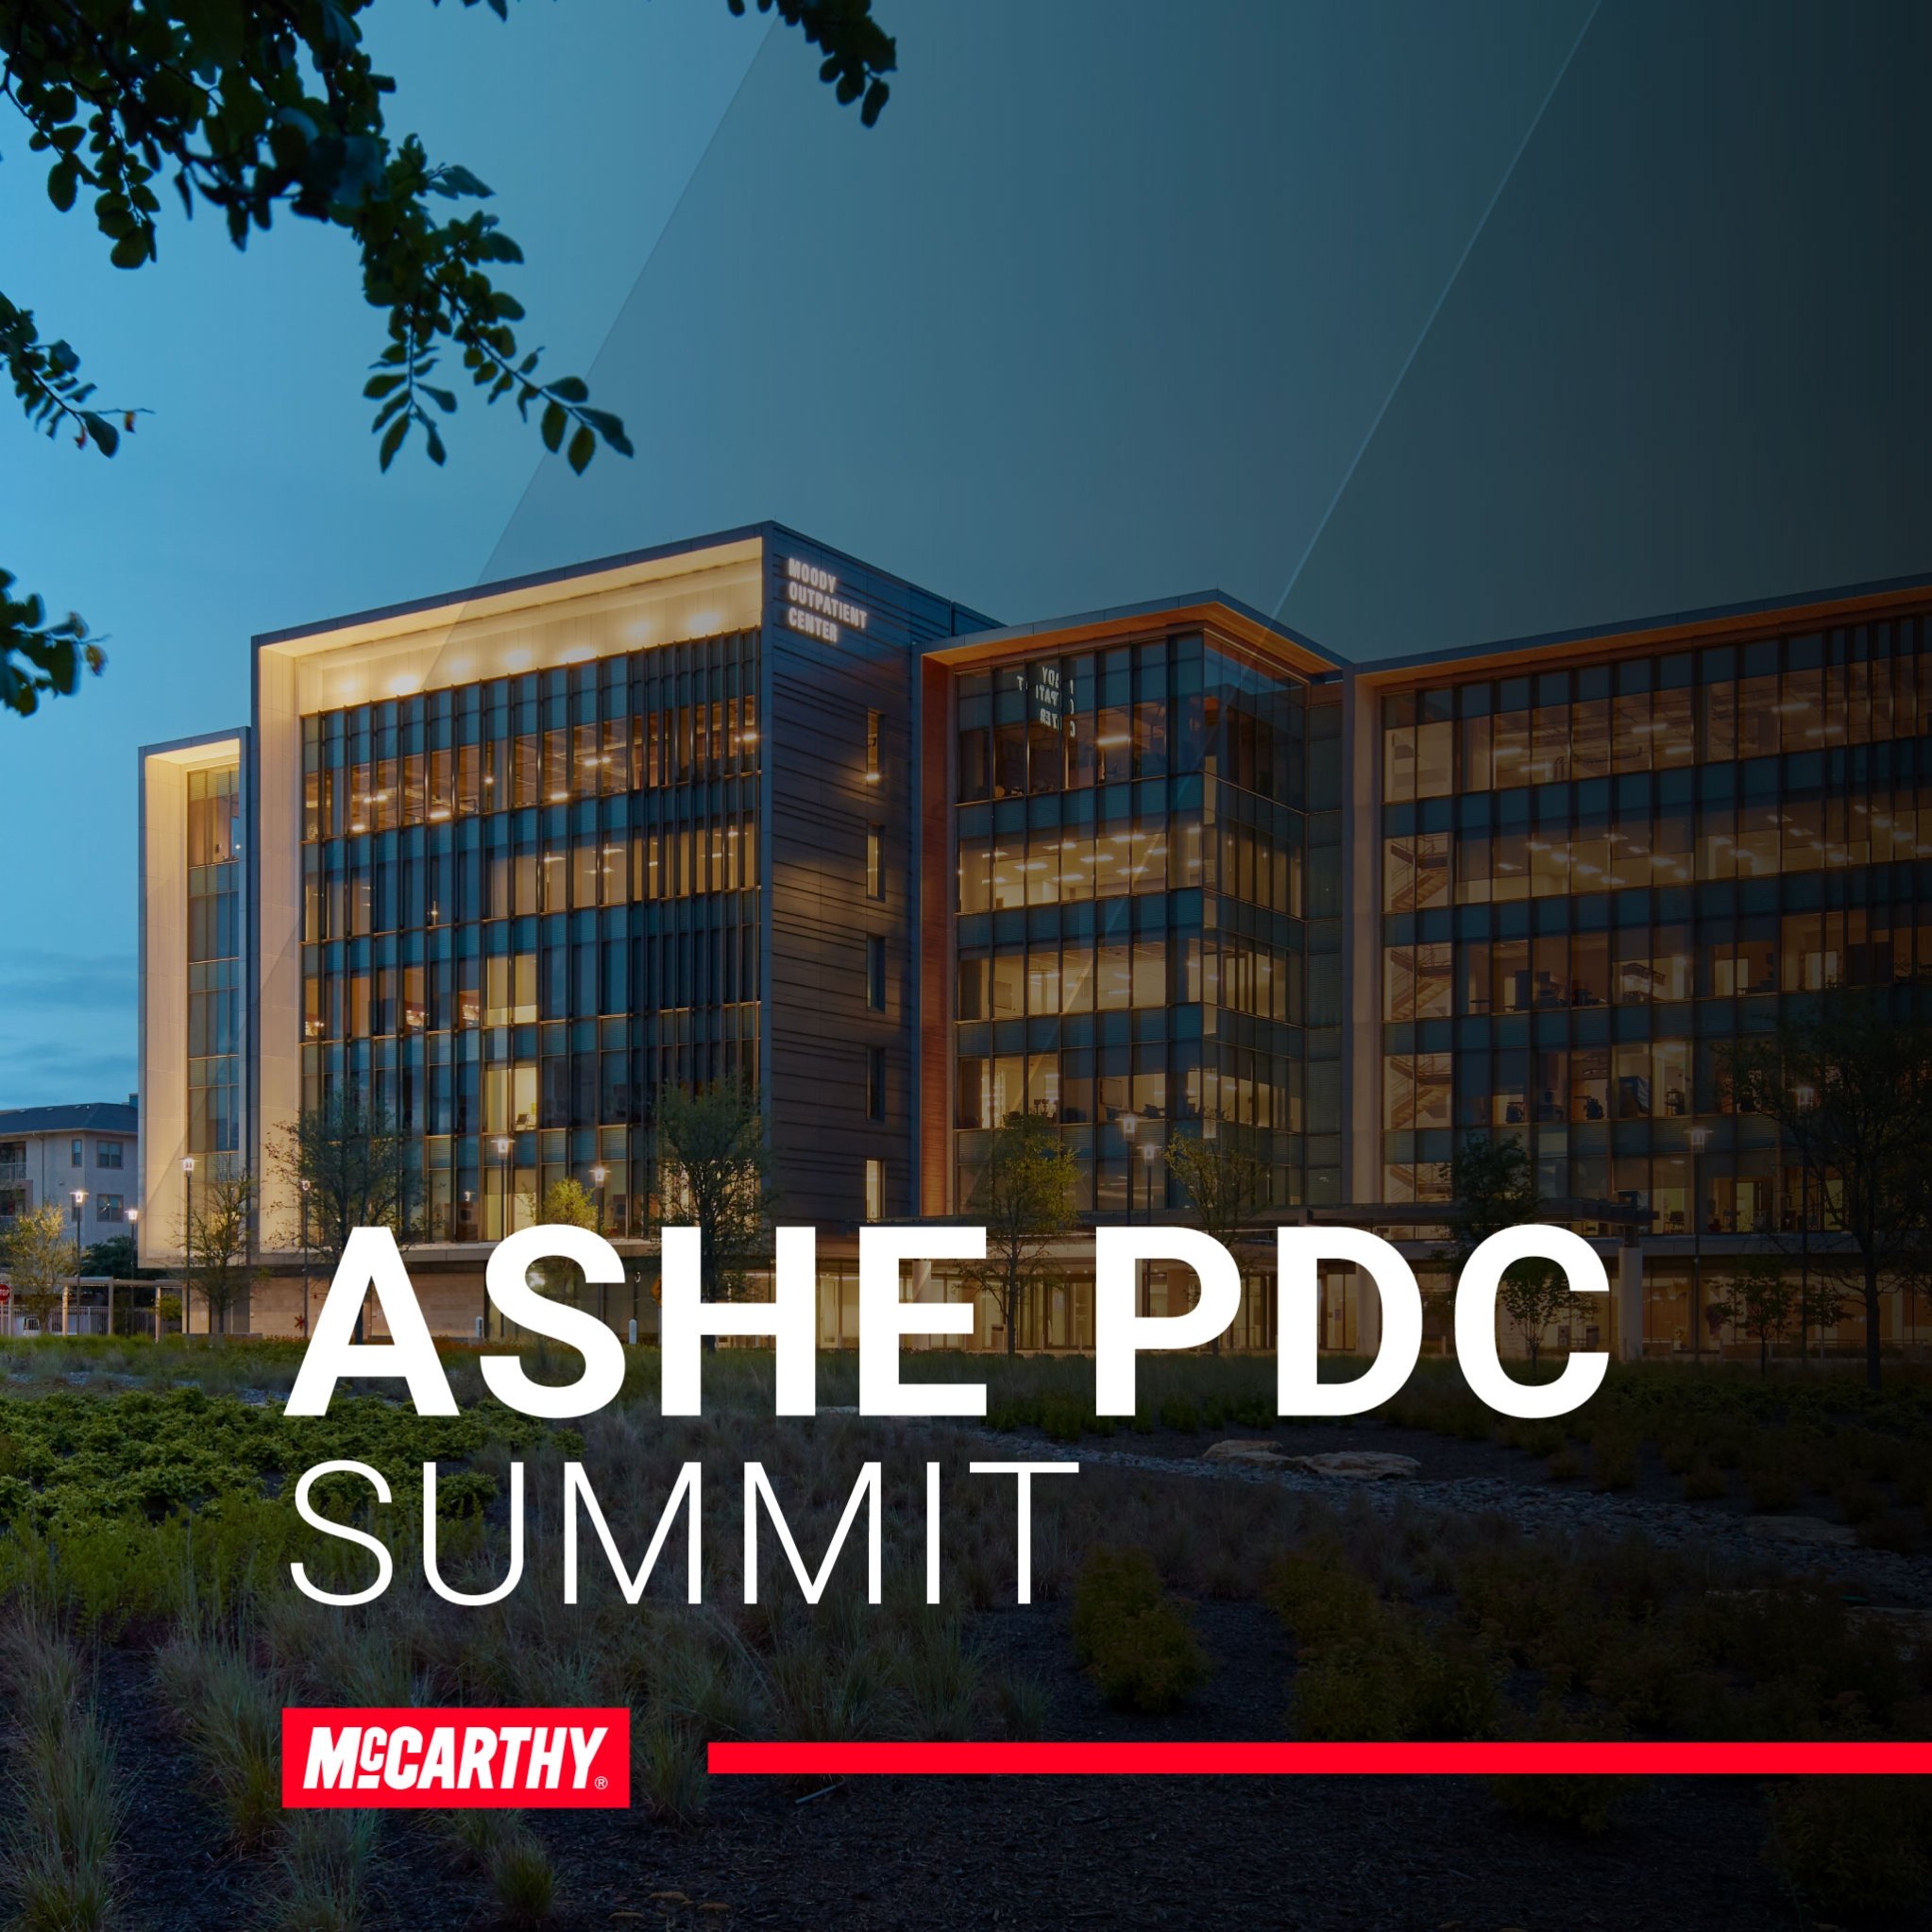 Join McCarthy at the ASHE PDC Summit in Phoenix